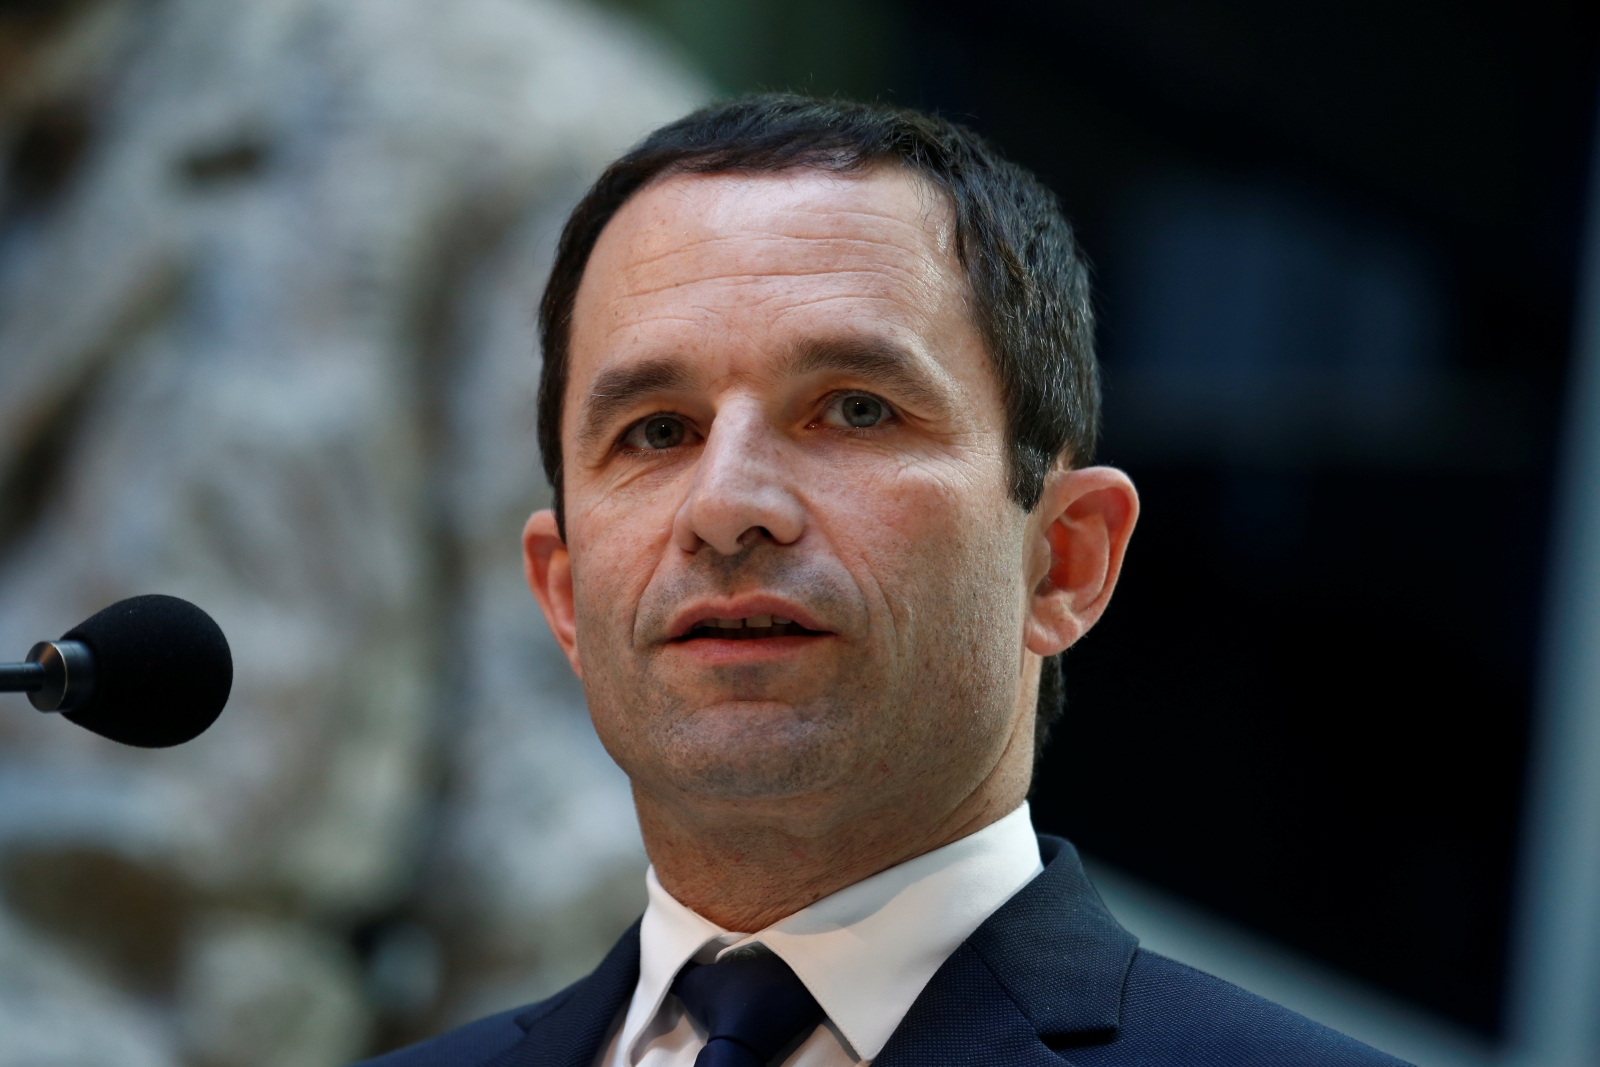 Who is Benoit Hamon, the hard-left socialist candidate running for the French presidency?